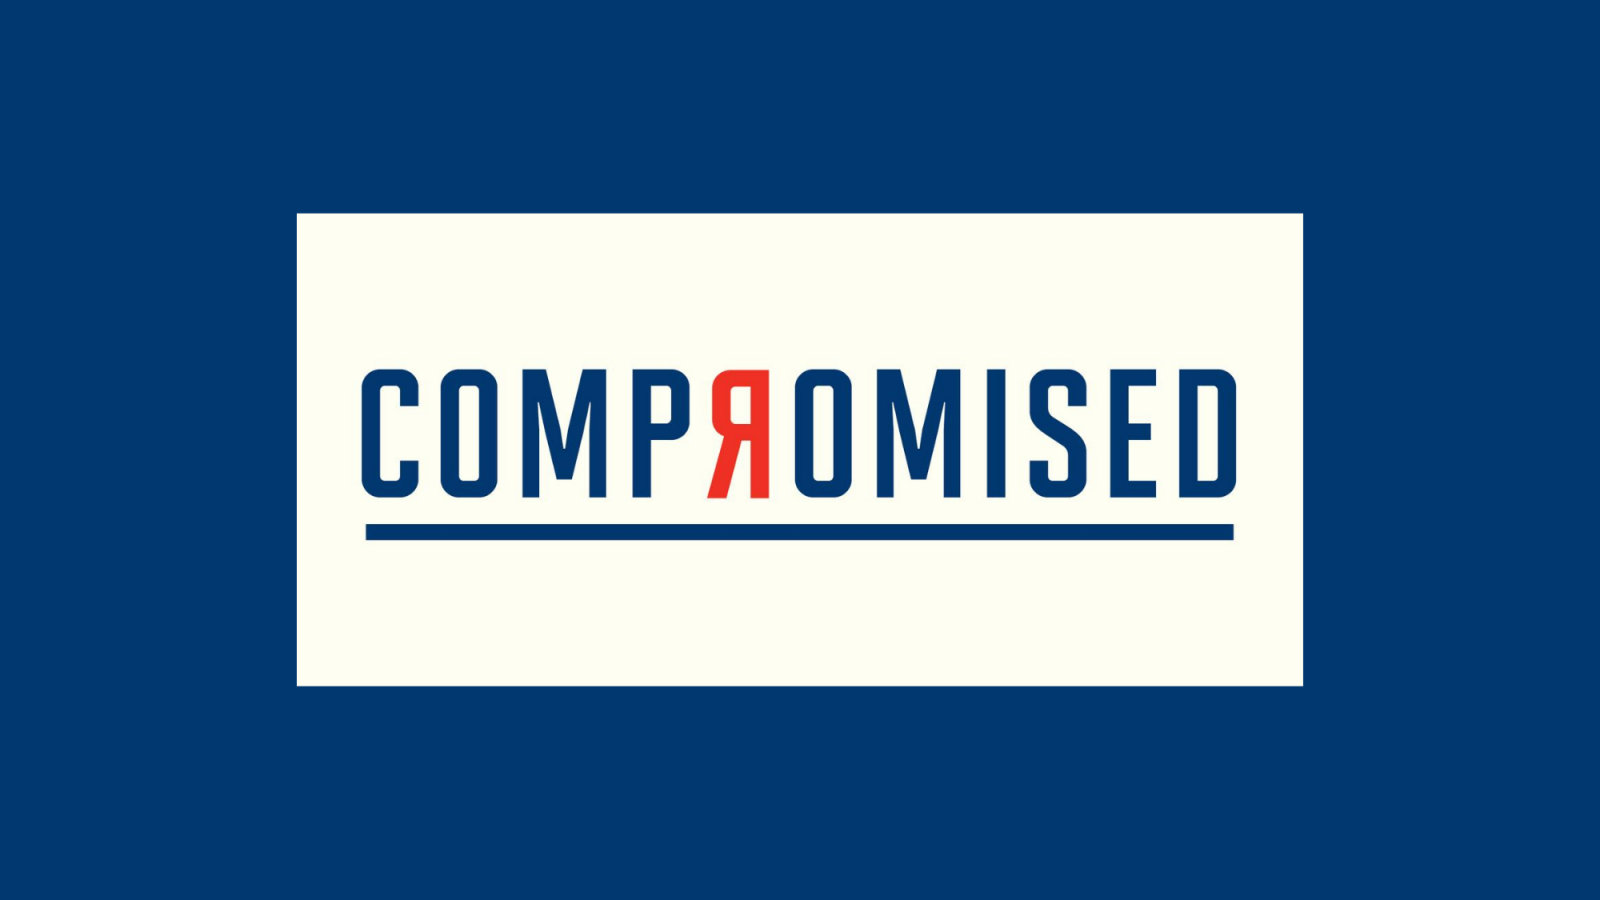 Banner reading &quot;COMPROMISED&quot;; the letter R is backwards and in red